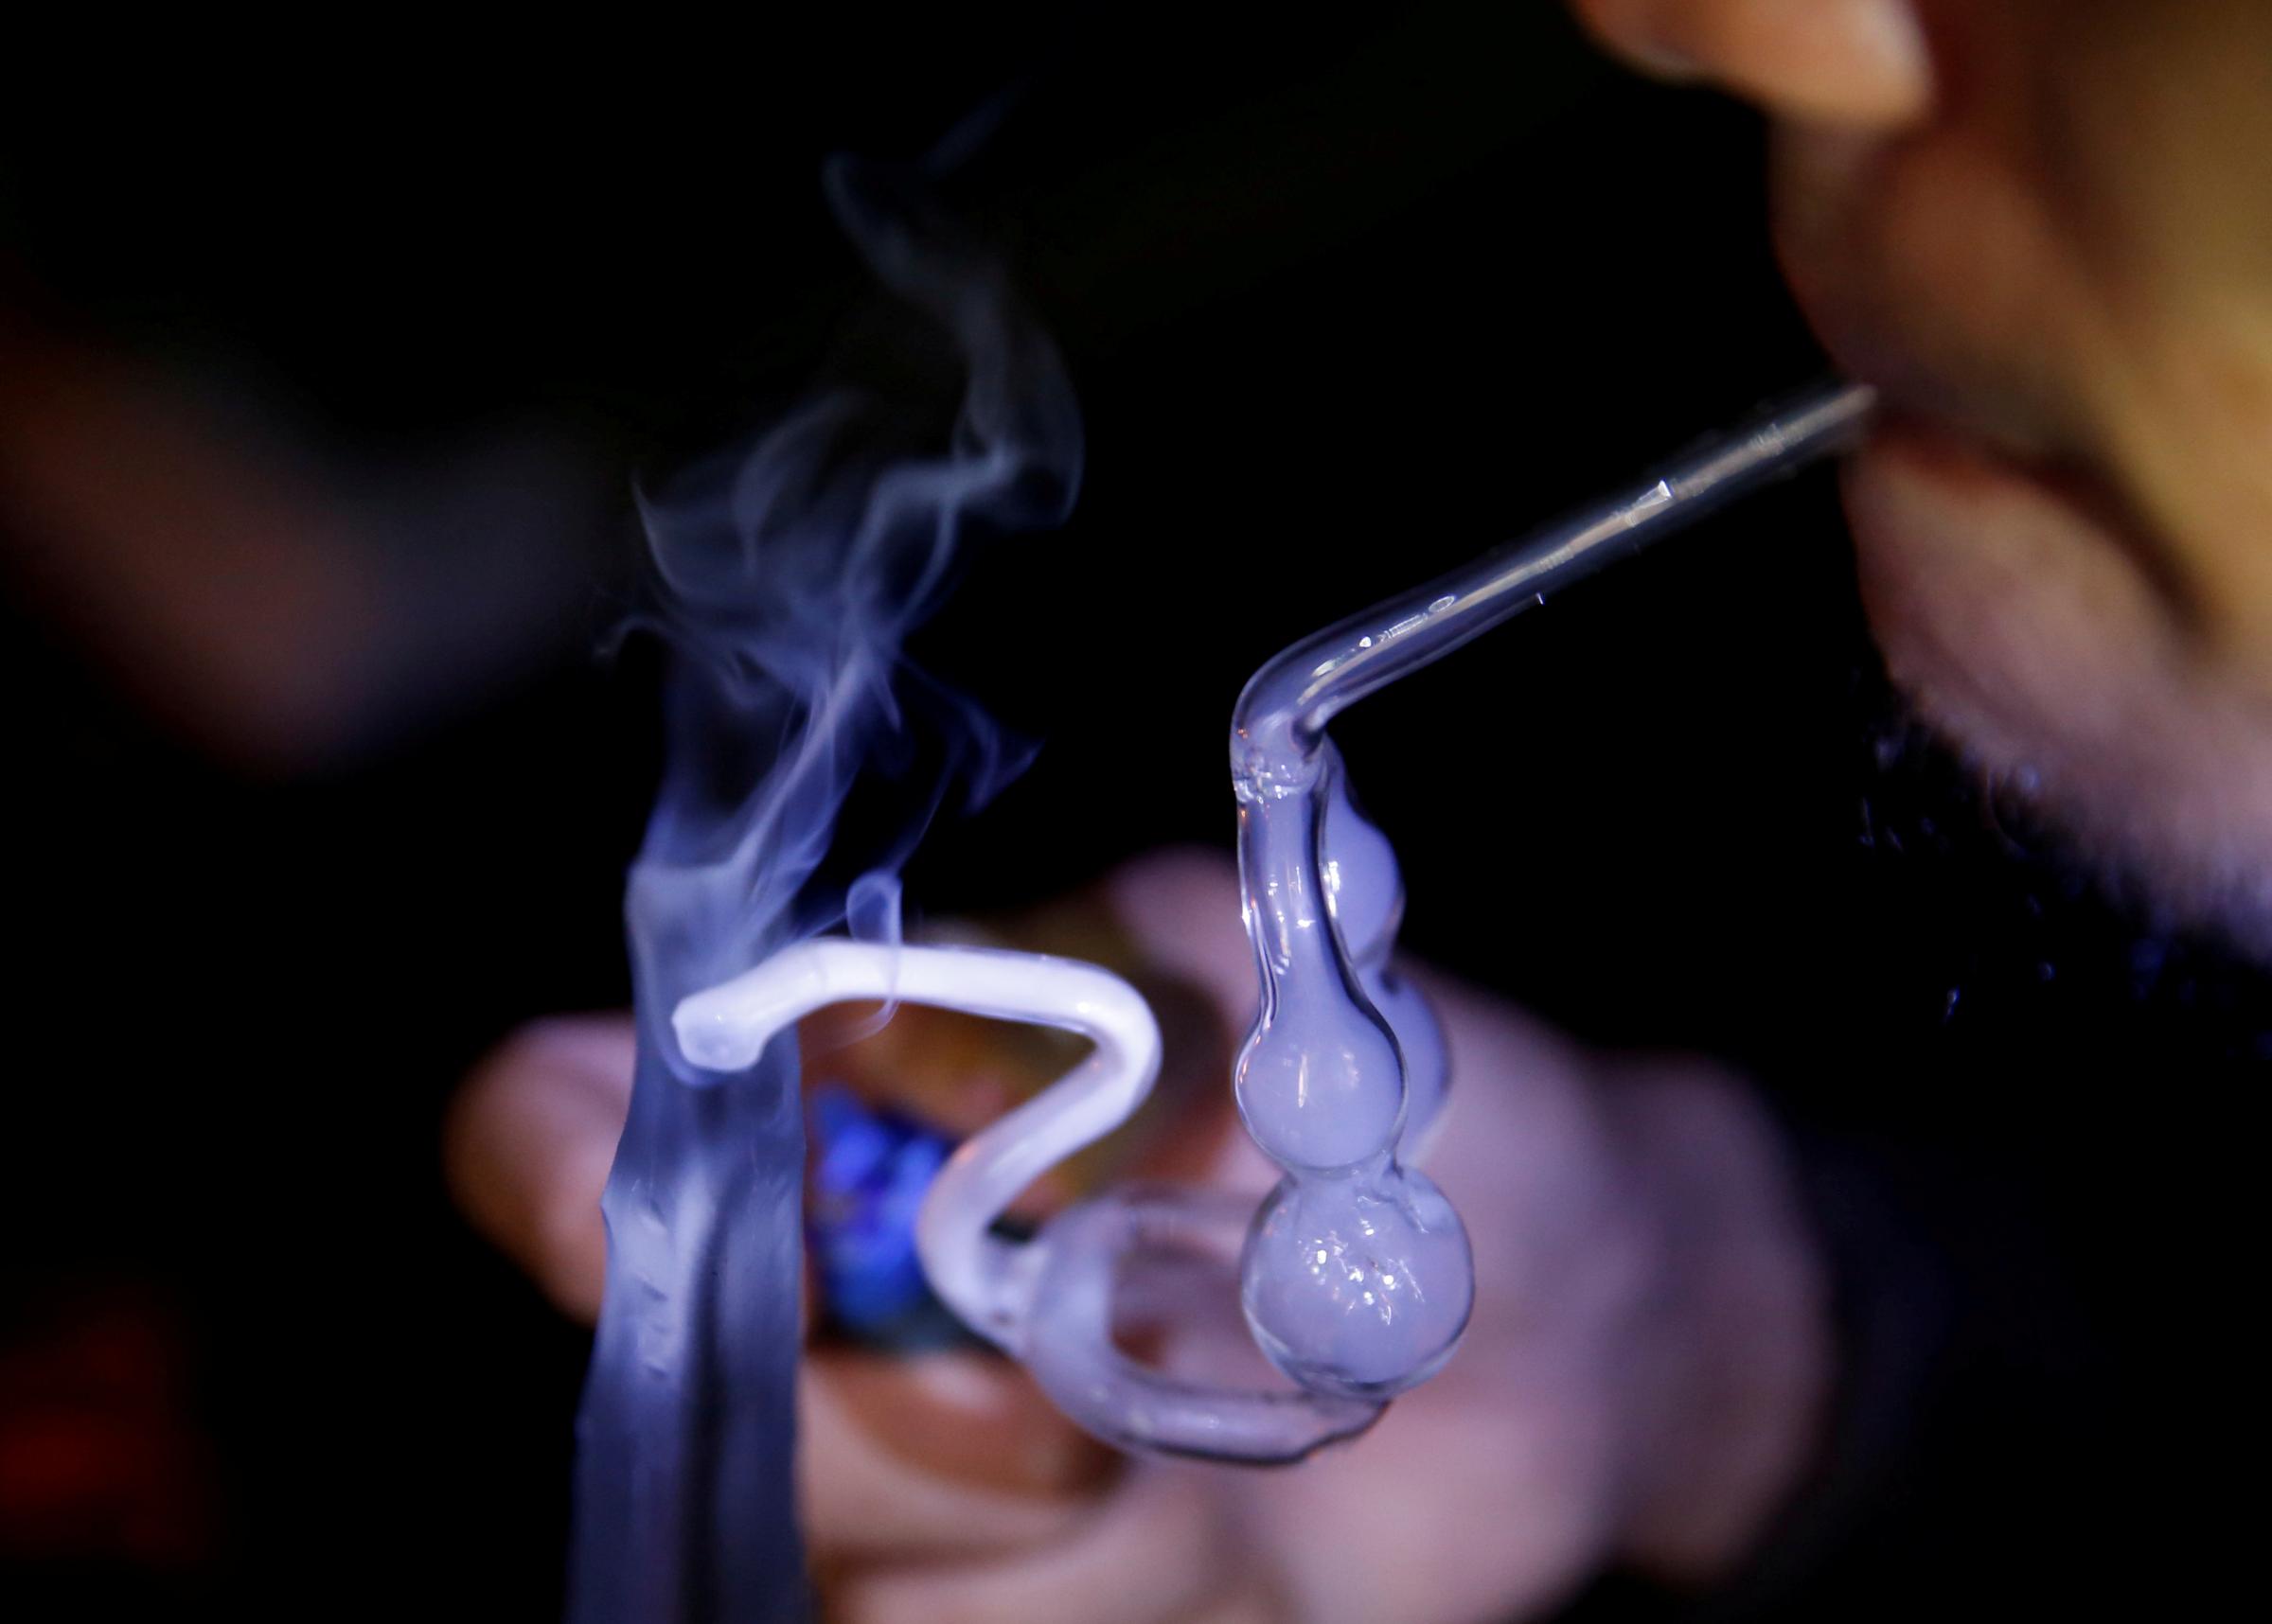 A drug addict uses a glass water pipe to smoke shabu at an undisclosed drug den in Manila